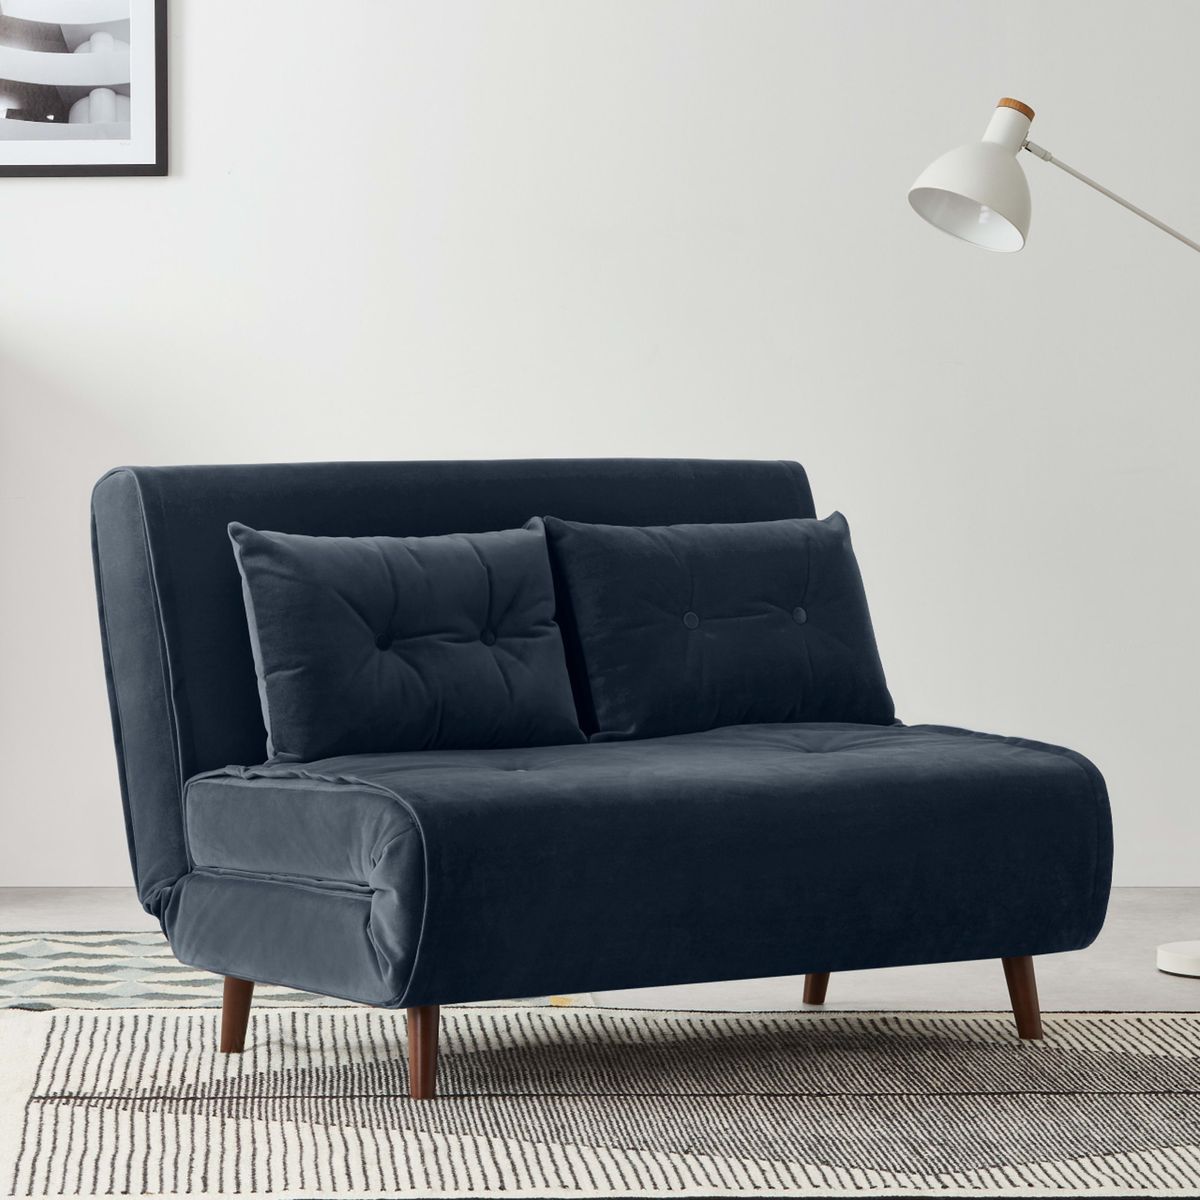 The Made Com Haru Sofa Bed Is Finally Back On Next S Website Ideal Home